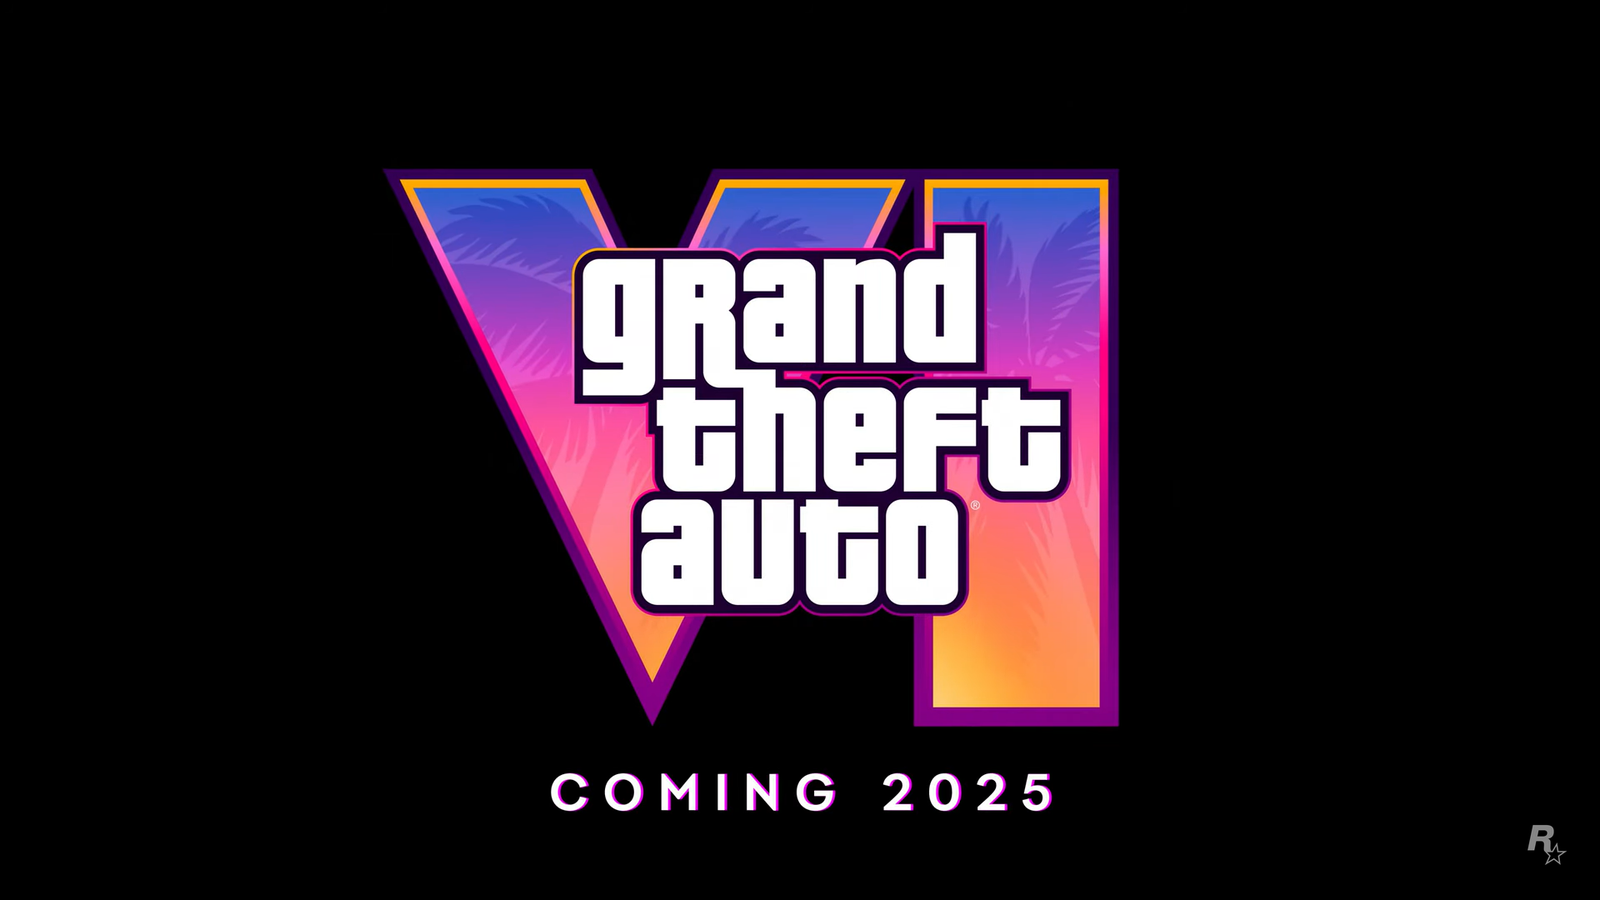 GTA 6 Trailer Confirmed for December, Leaked Details Unearth Scrapped Story  DLC and Bully Sequel For GTA V